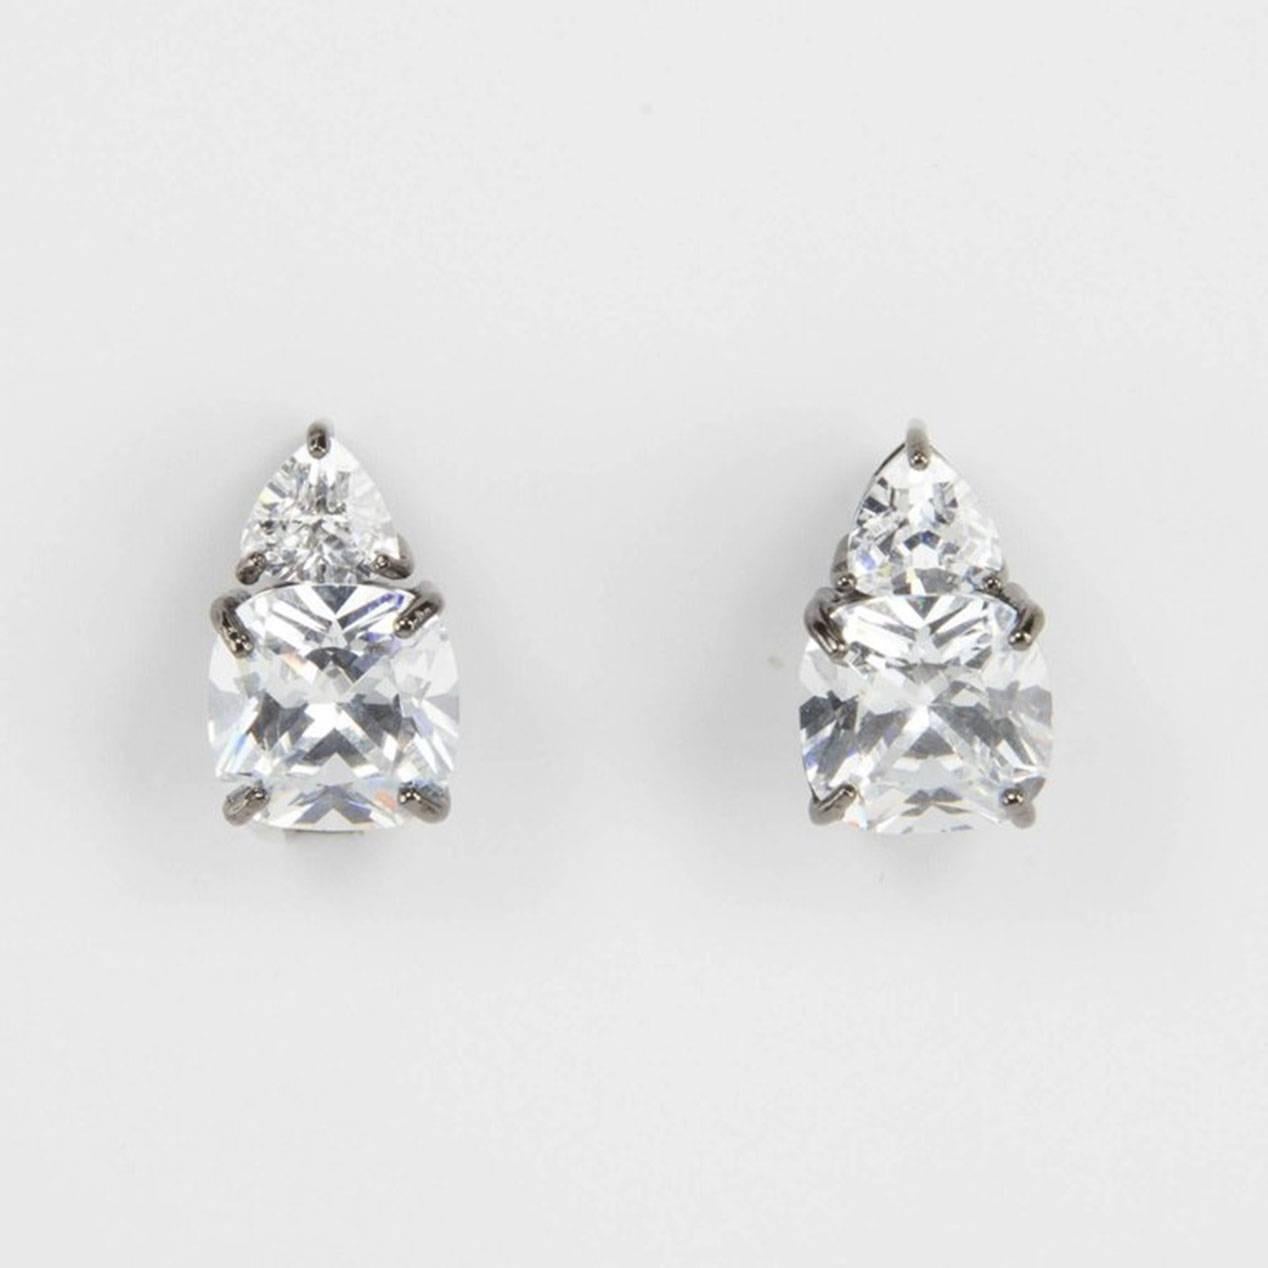 Simply Beautiful…each earring is set with one large square cushion shape faux Diamond, 10mm x 10mm and one Trillion cut faux Diamond, making a striking statement! All hand set in oxidized Sterling Silver. Approx. total length .75